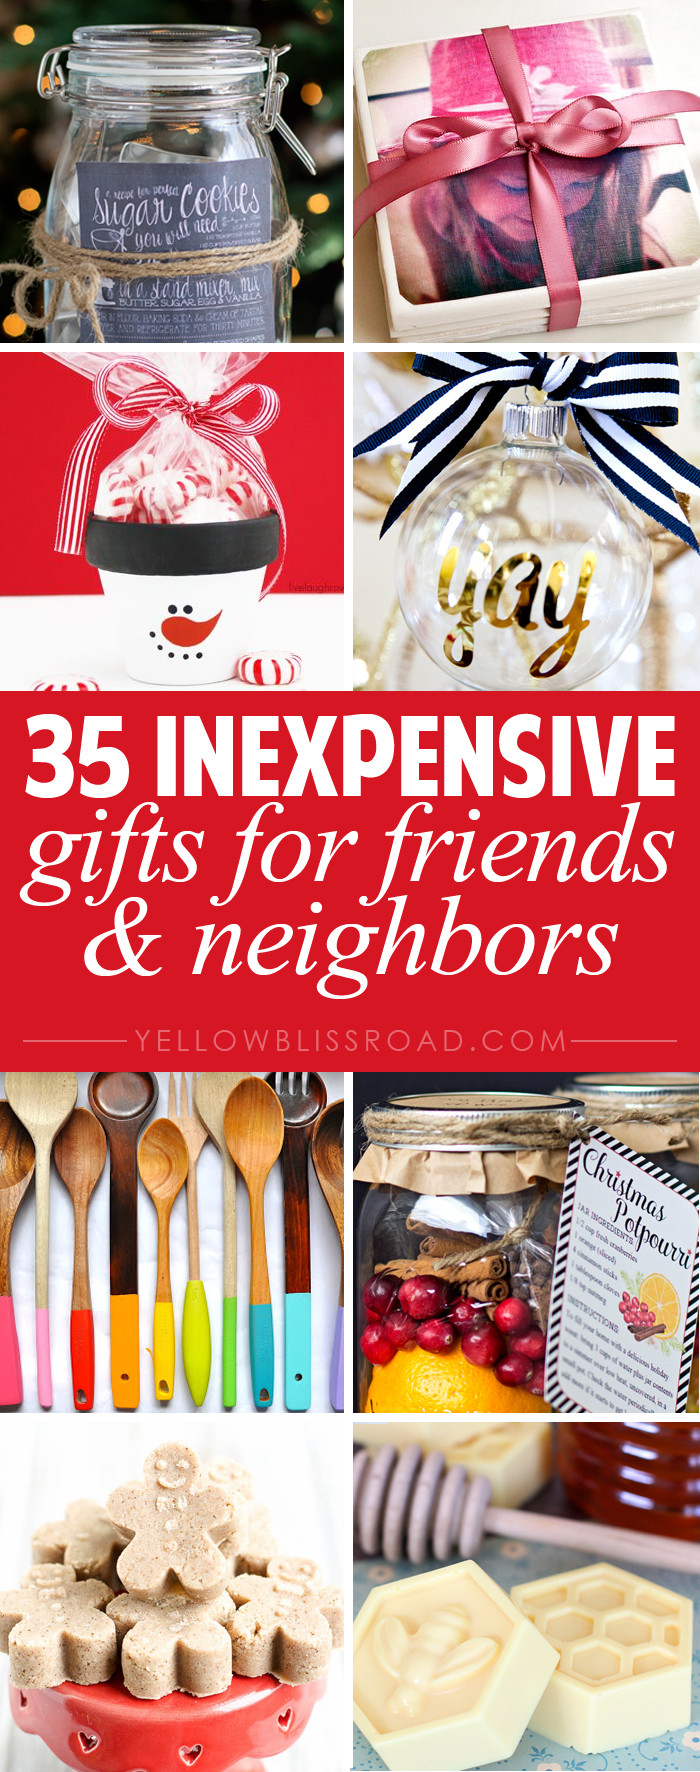 Friend Christmas Gift Ideas
 35 Gift Ideas for Neighbors and Friends Yellow Bliss Road